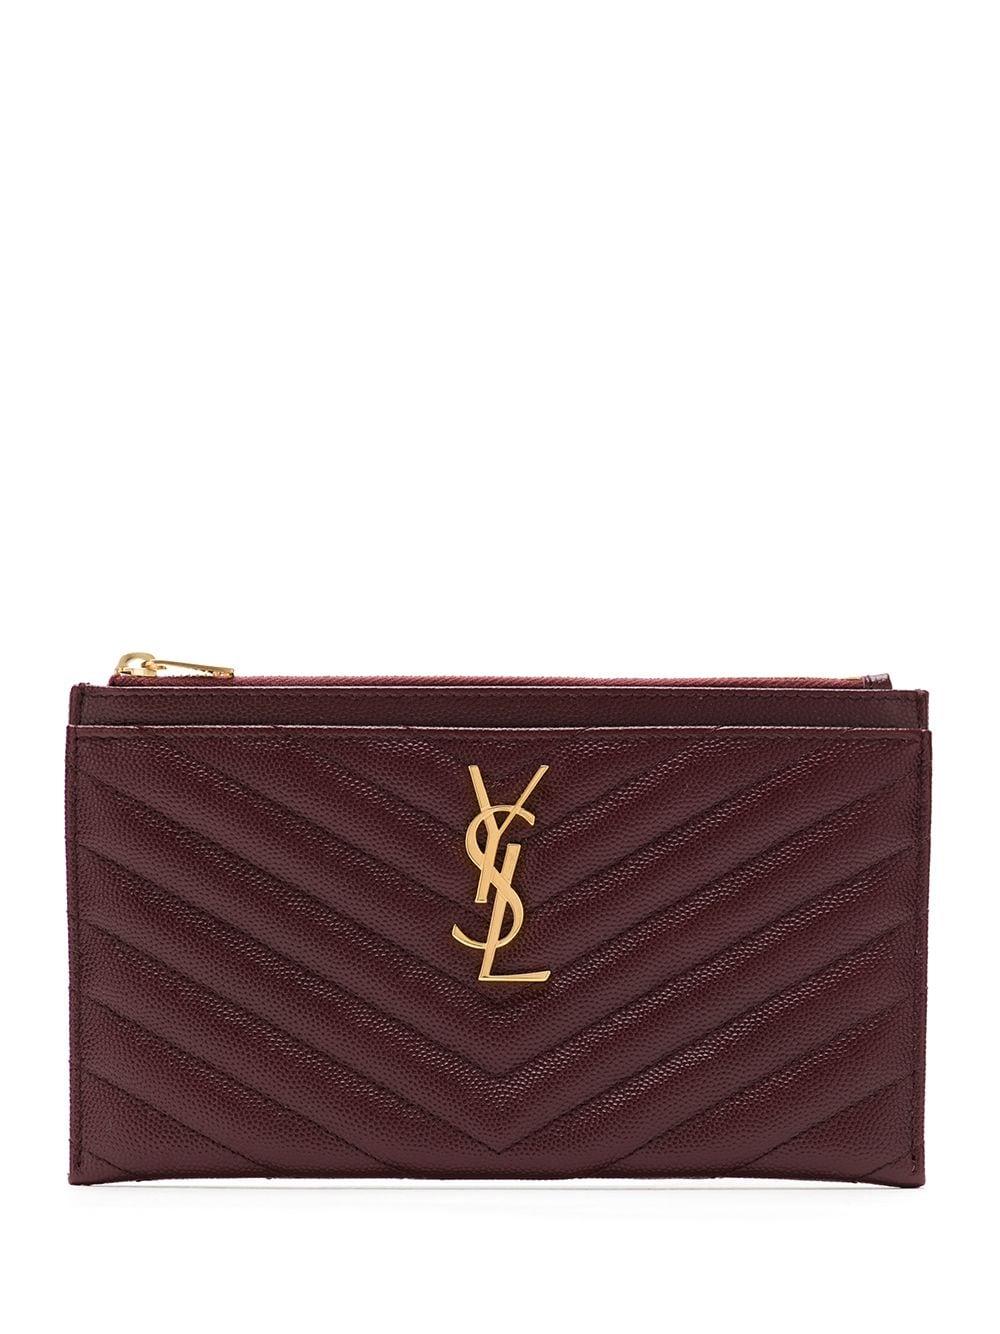 Saint Laurent Monogramme Quilted Wallet in Red - Lyst